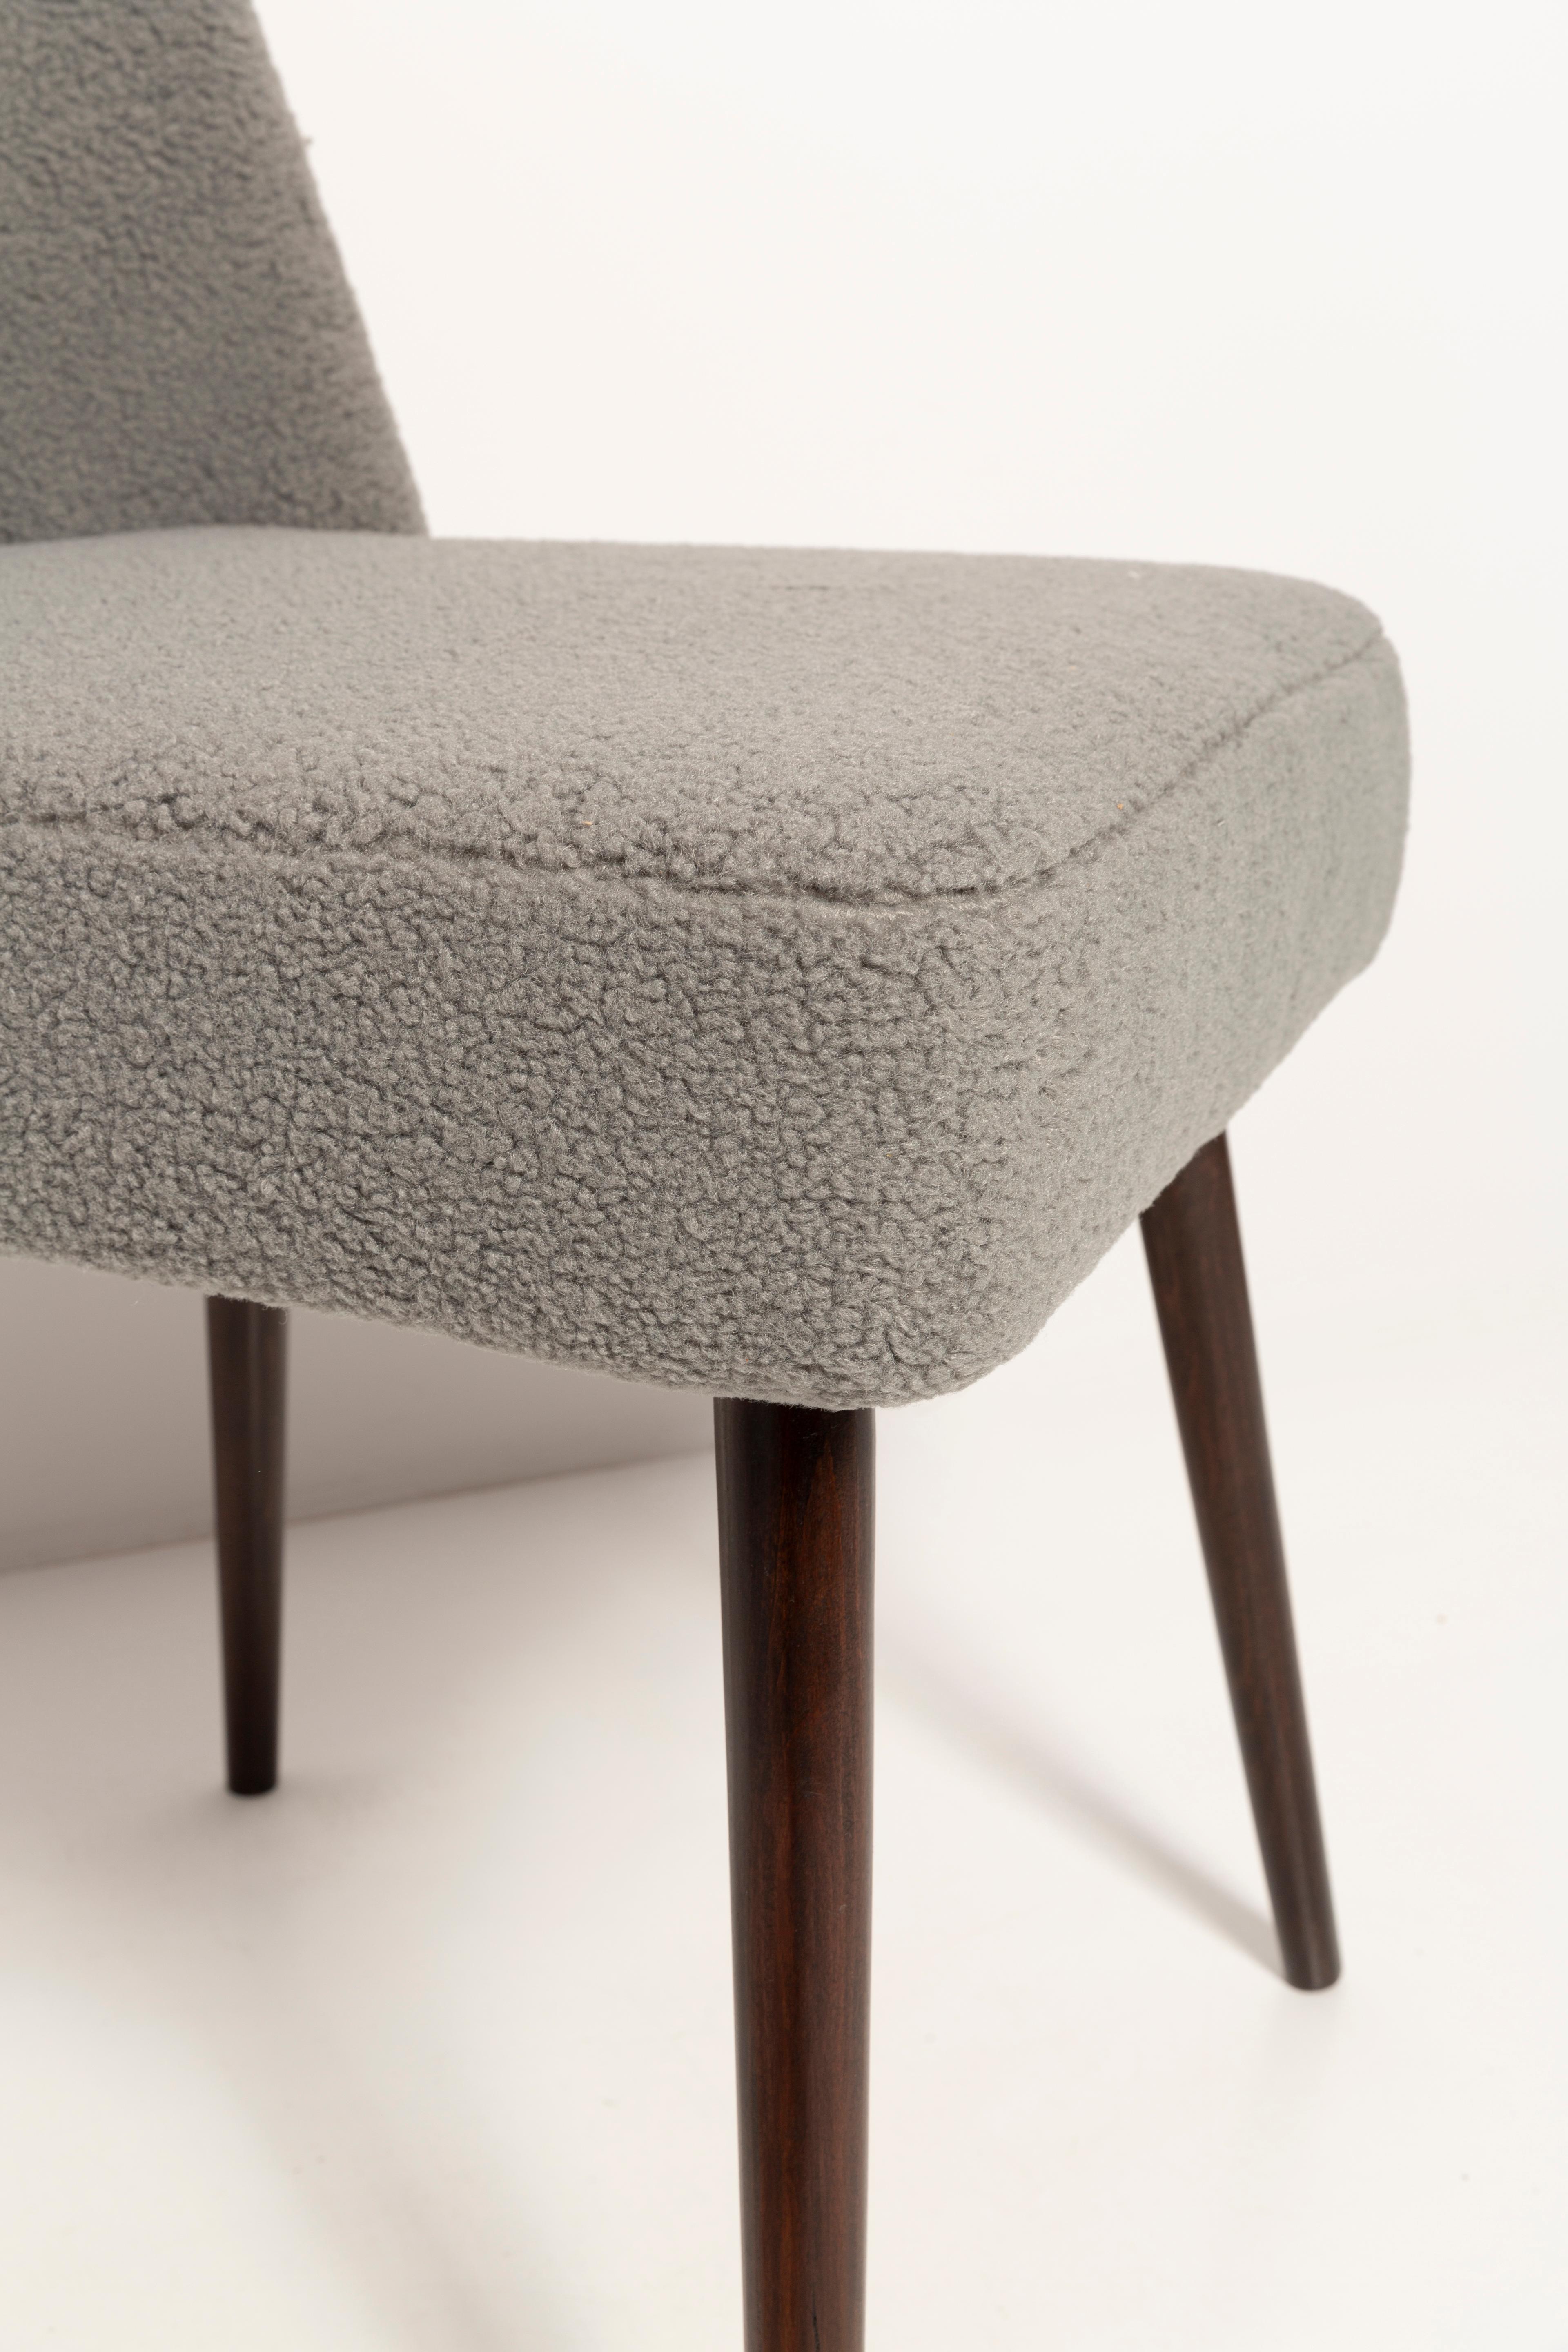 Gray Boucle 'Shell' Chair, Europe, 1960s For Sale 1